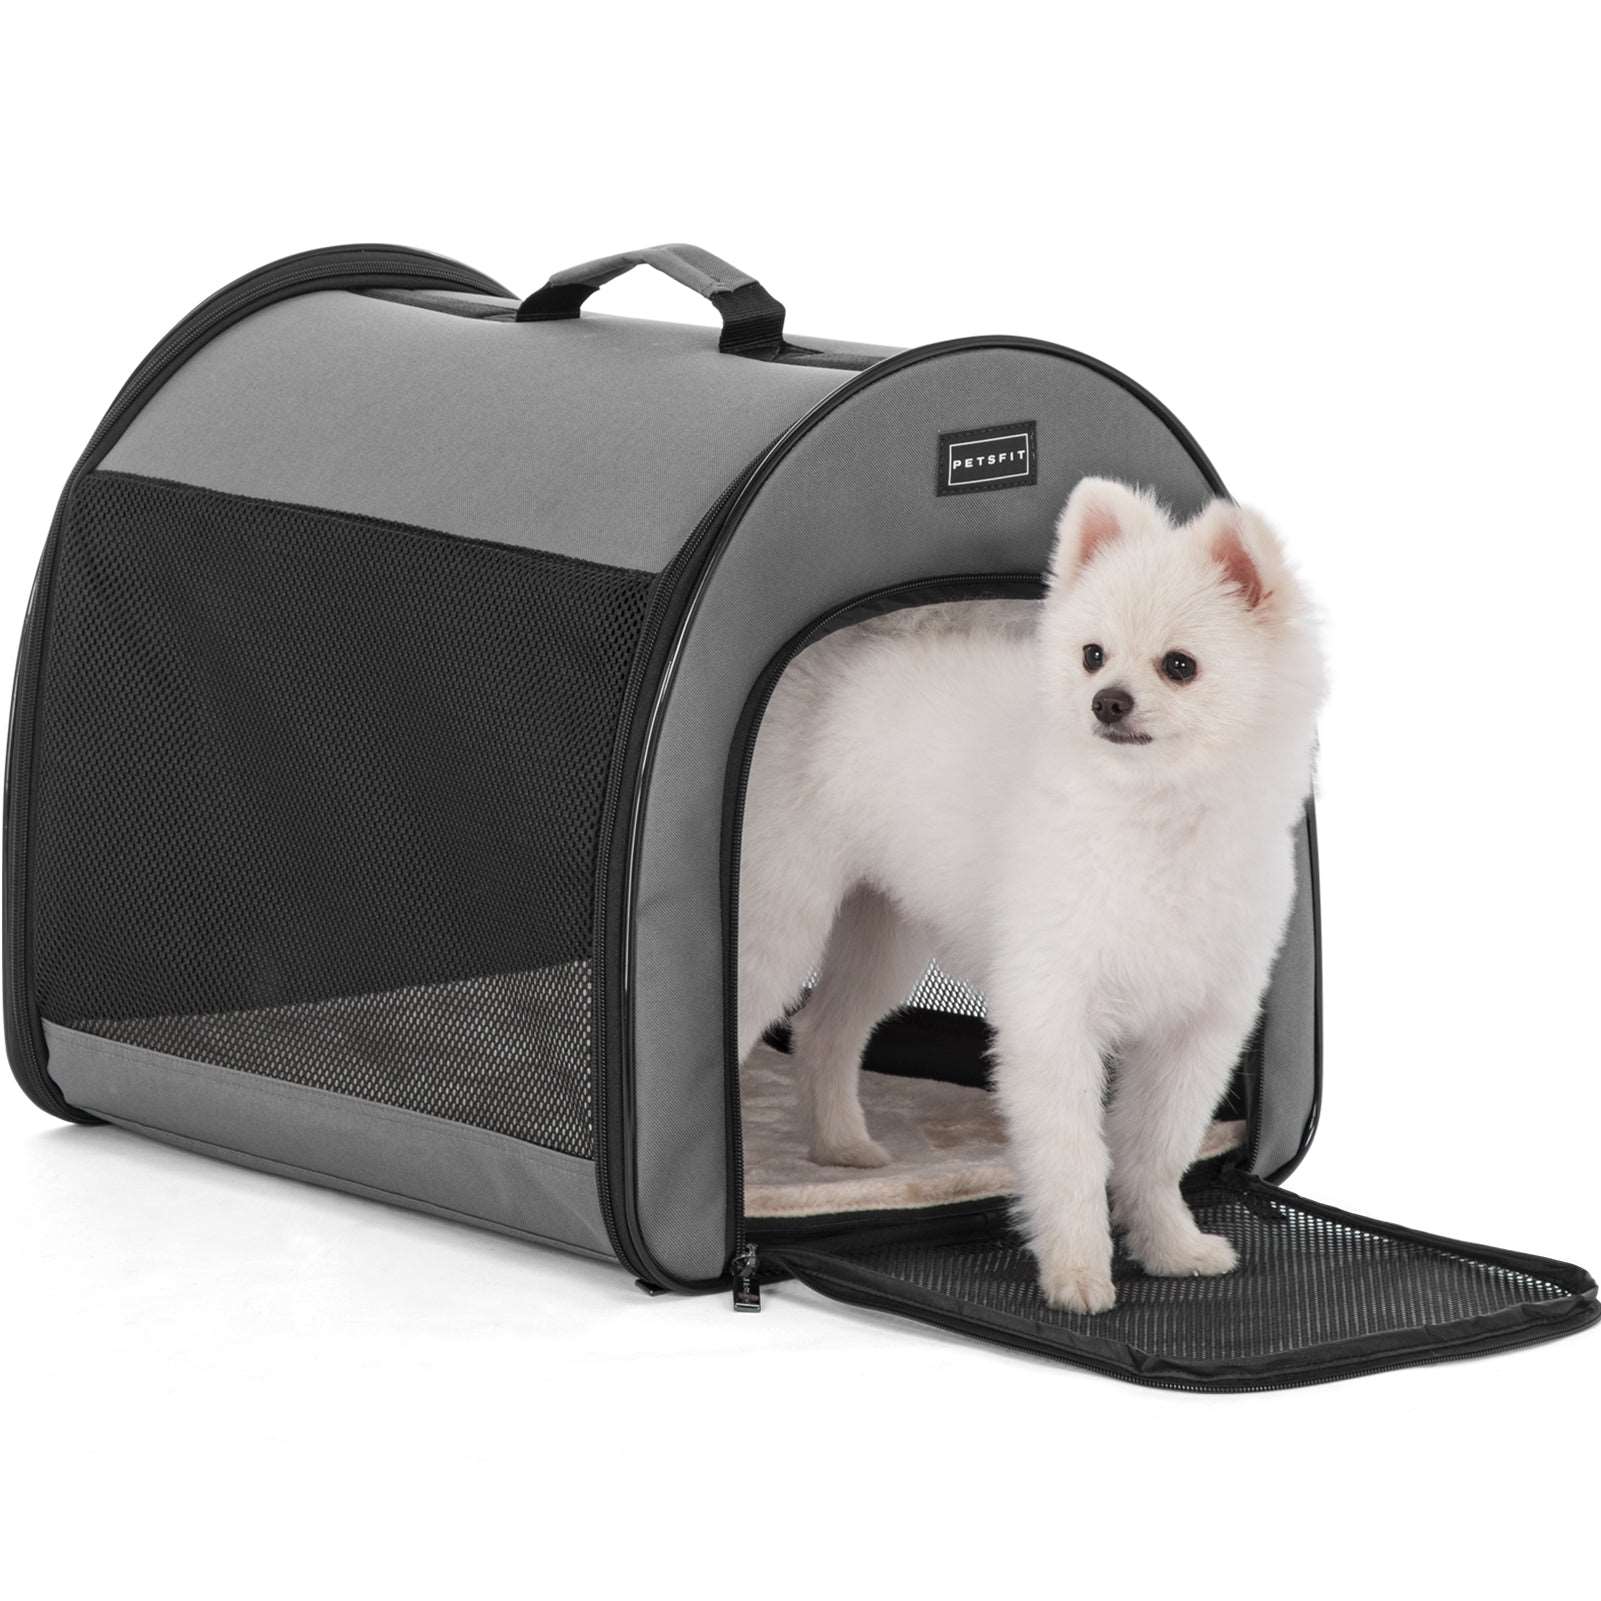 Petsfit-Arch-Design-Soft-Sided-Portable-Dog-Crate-01